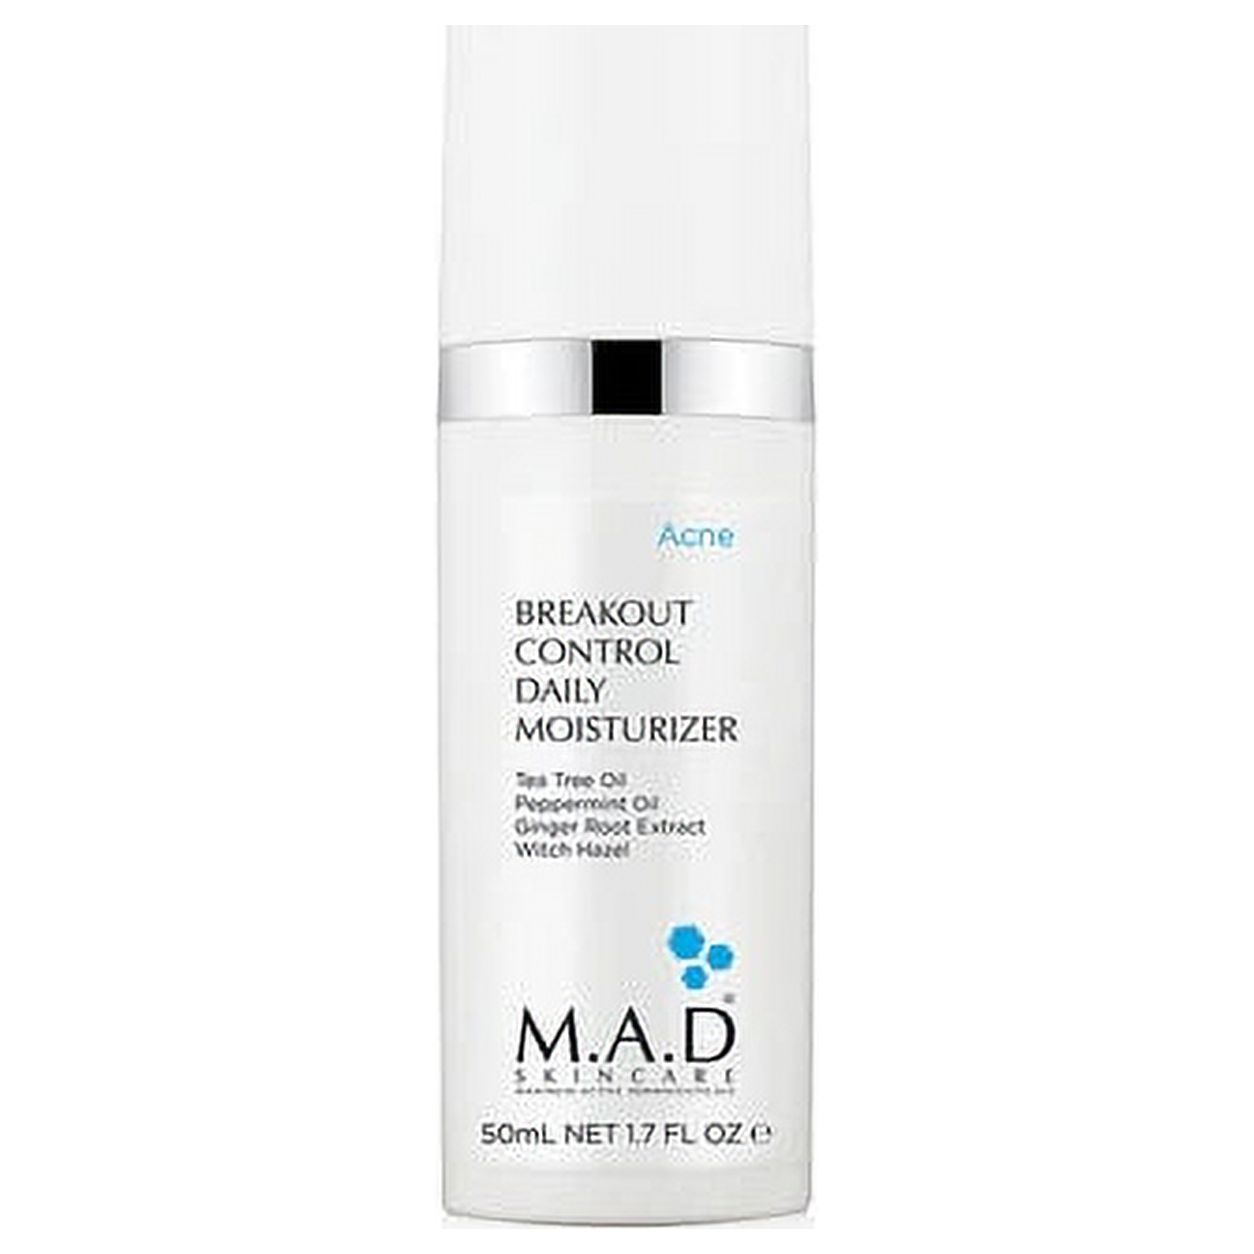 MAD Skincare Breakout Control Daily Moisturizer 1.7 fl oz - image 1 of 2